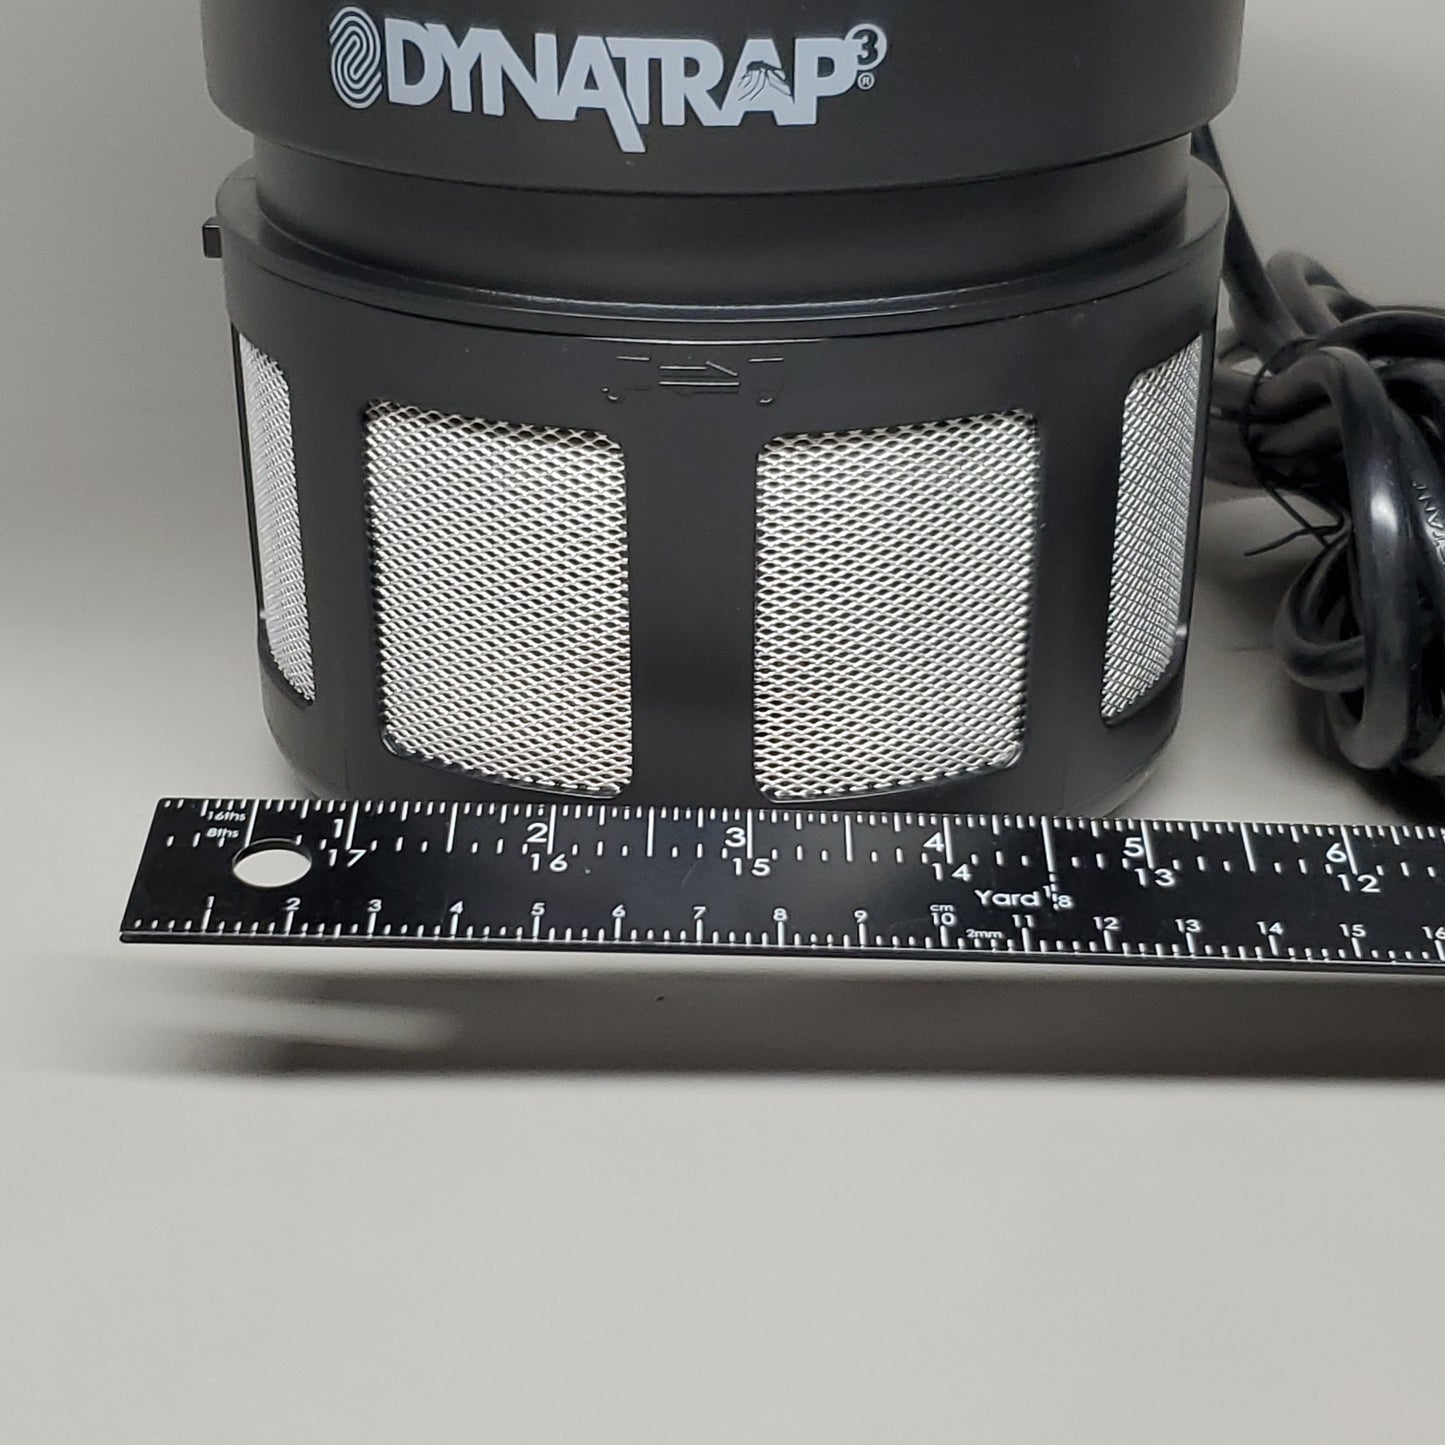 DYNATRAP Mosquito & Flying Insect Trap Hang Or Wall Mount 1/2 Acre DT1100SR (New)